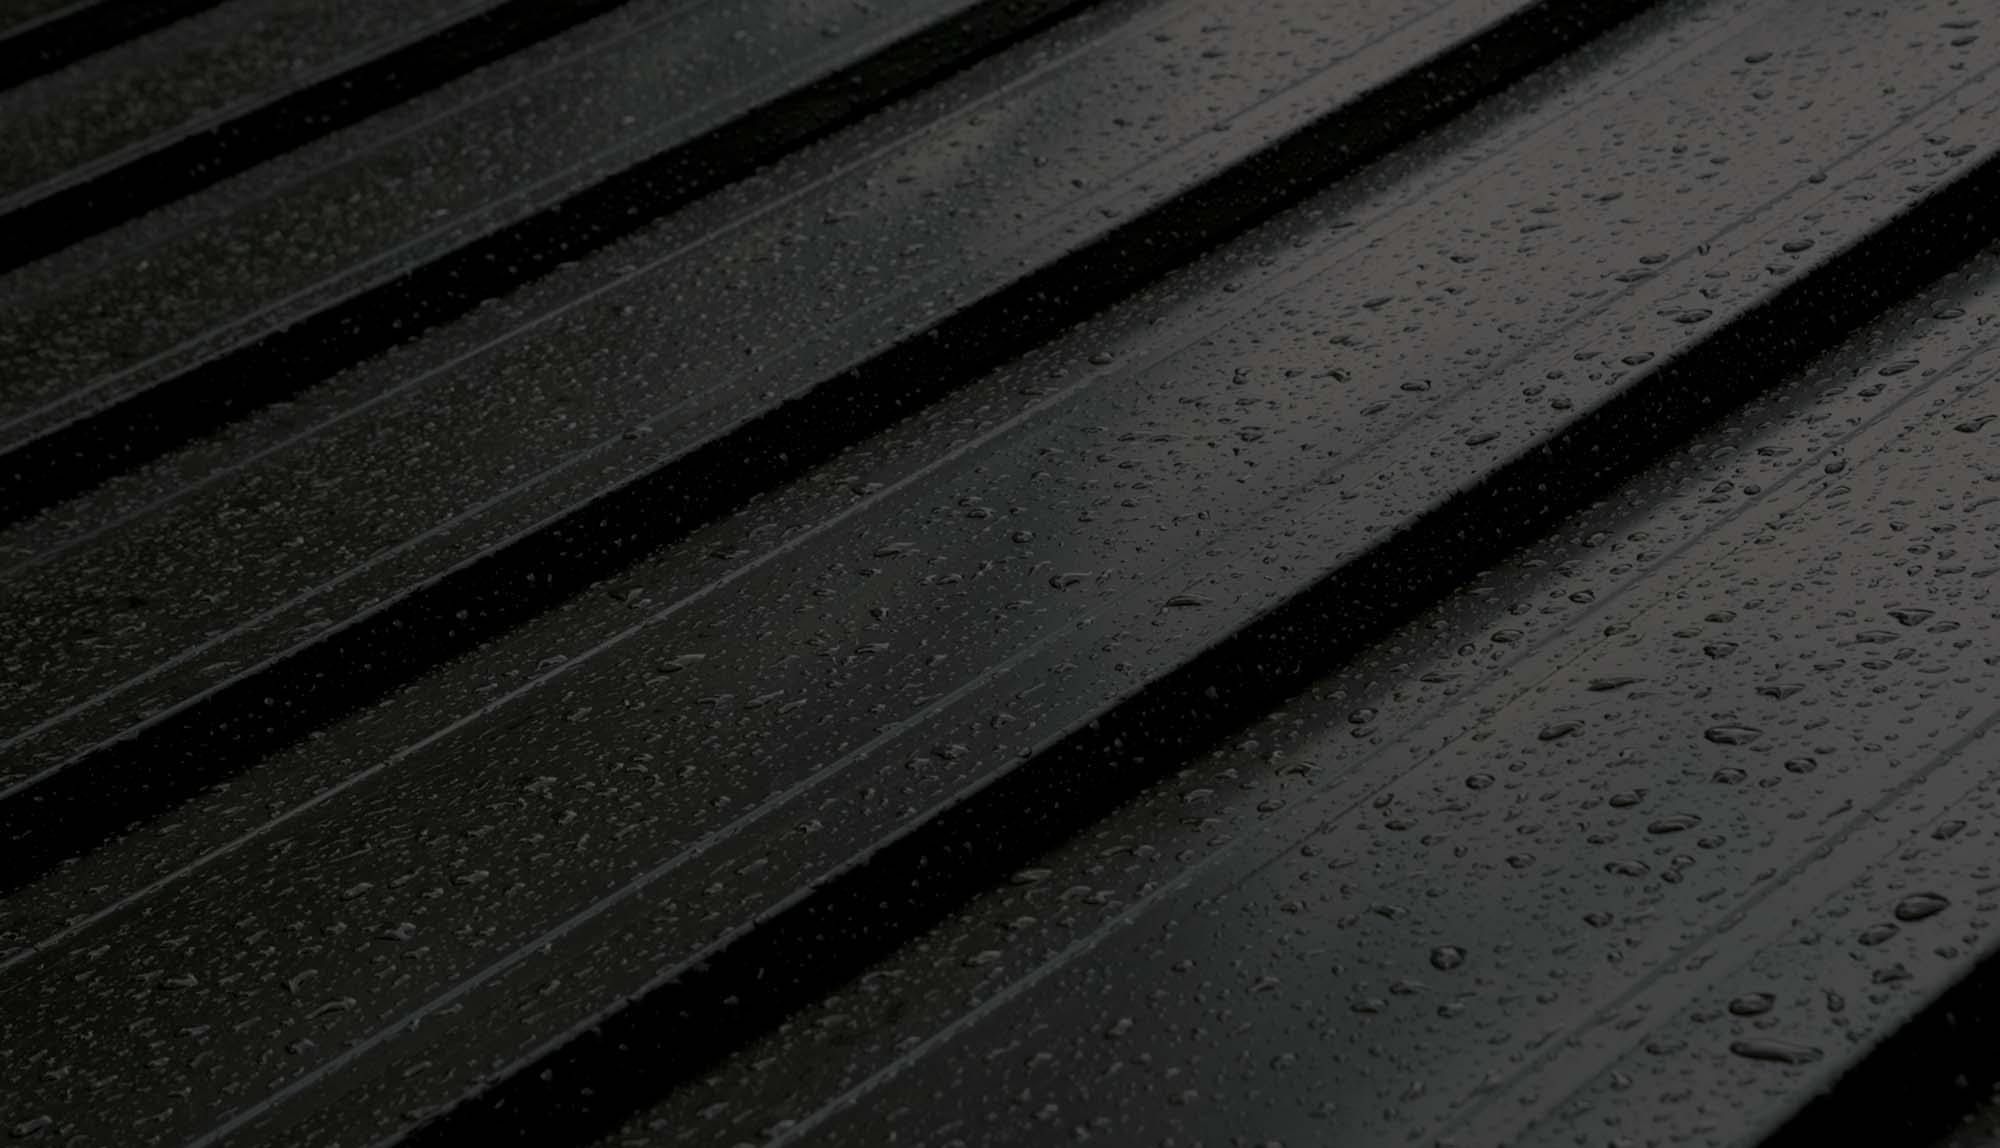 A metal roof with rain drops on it